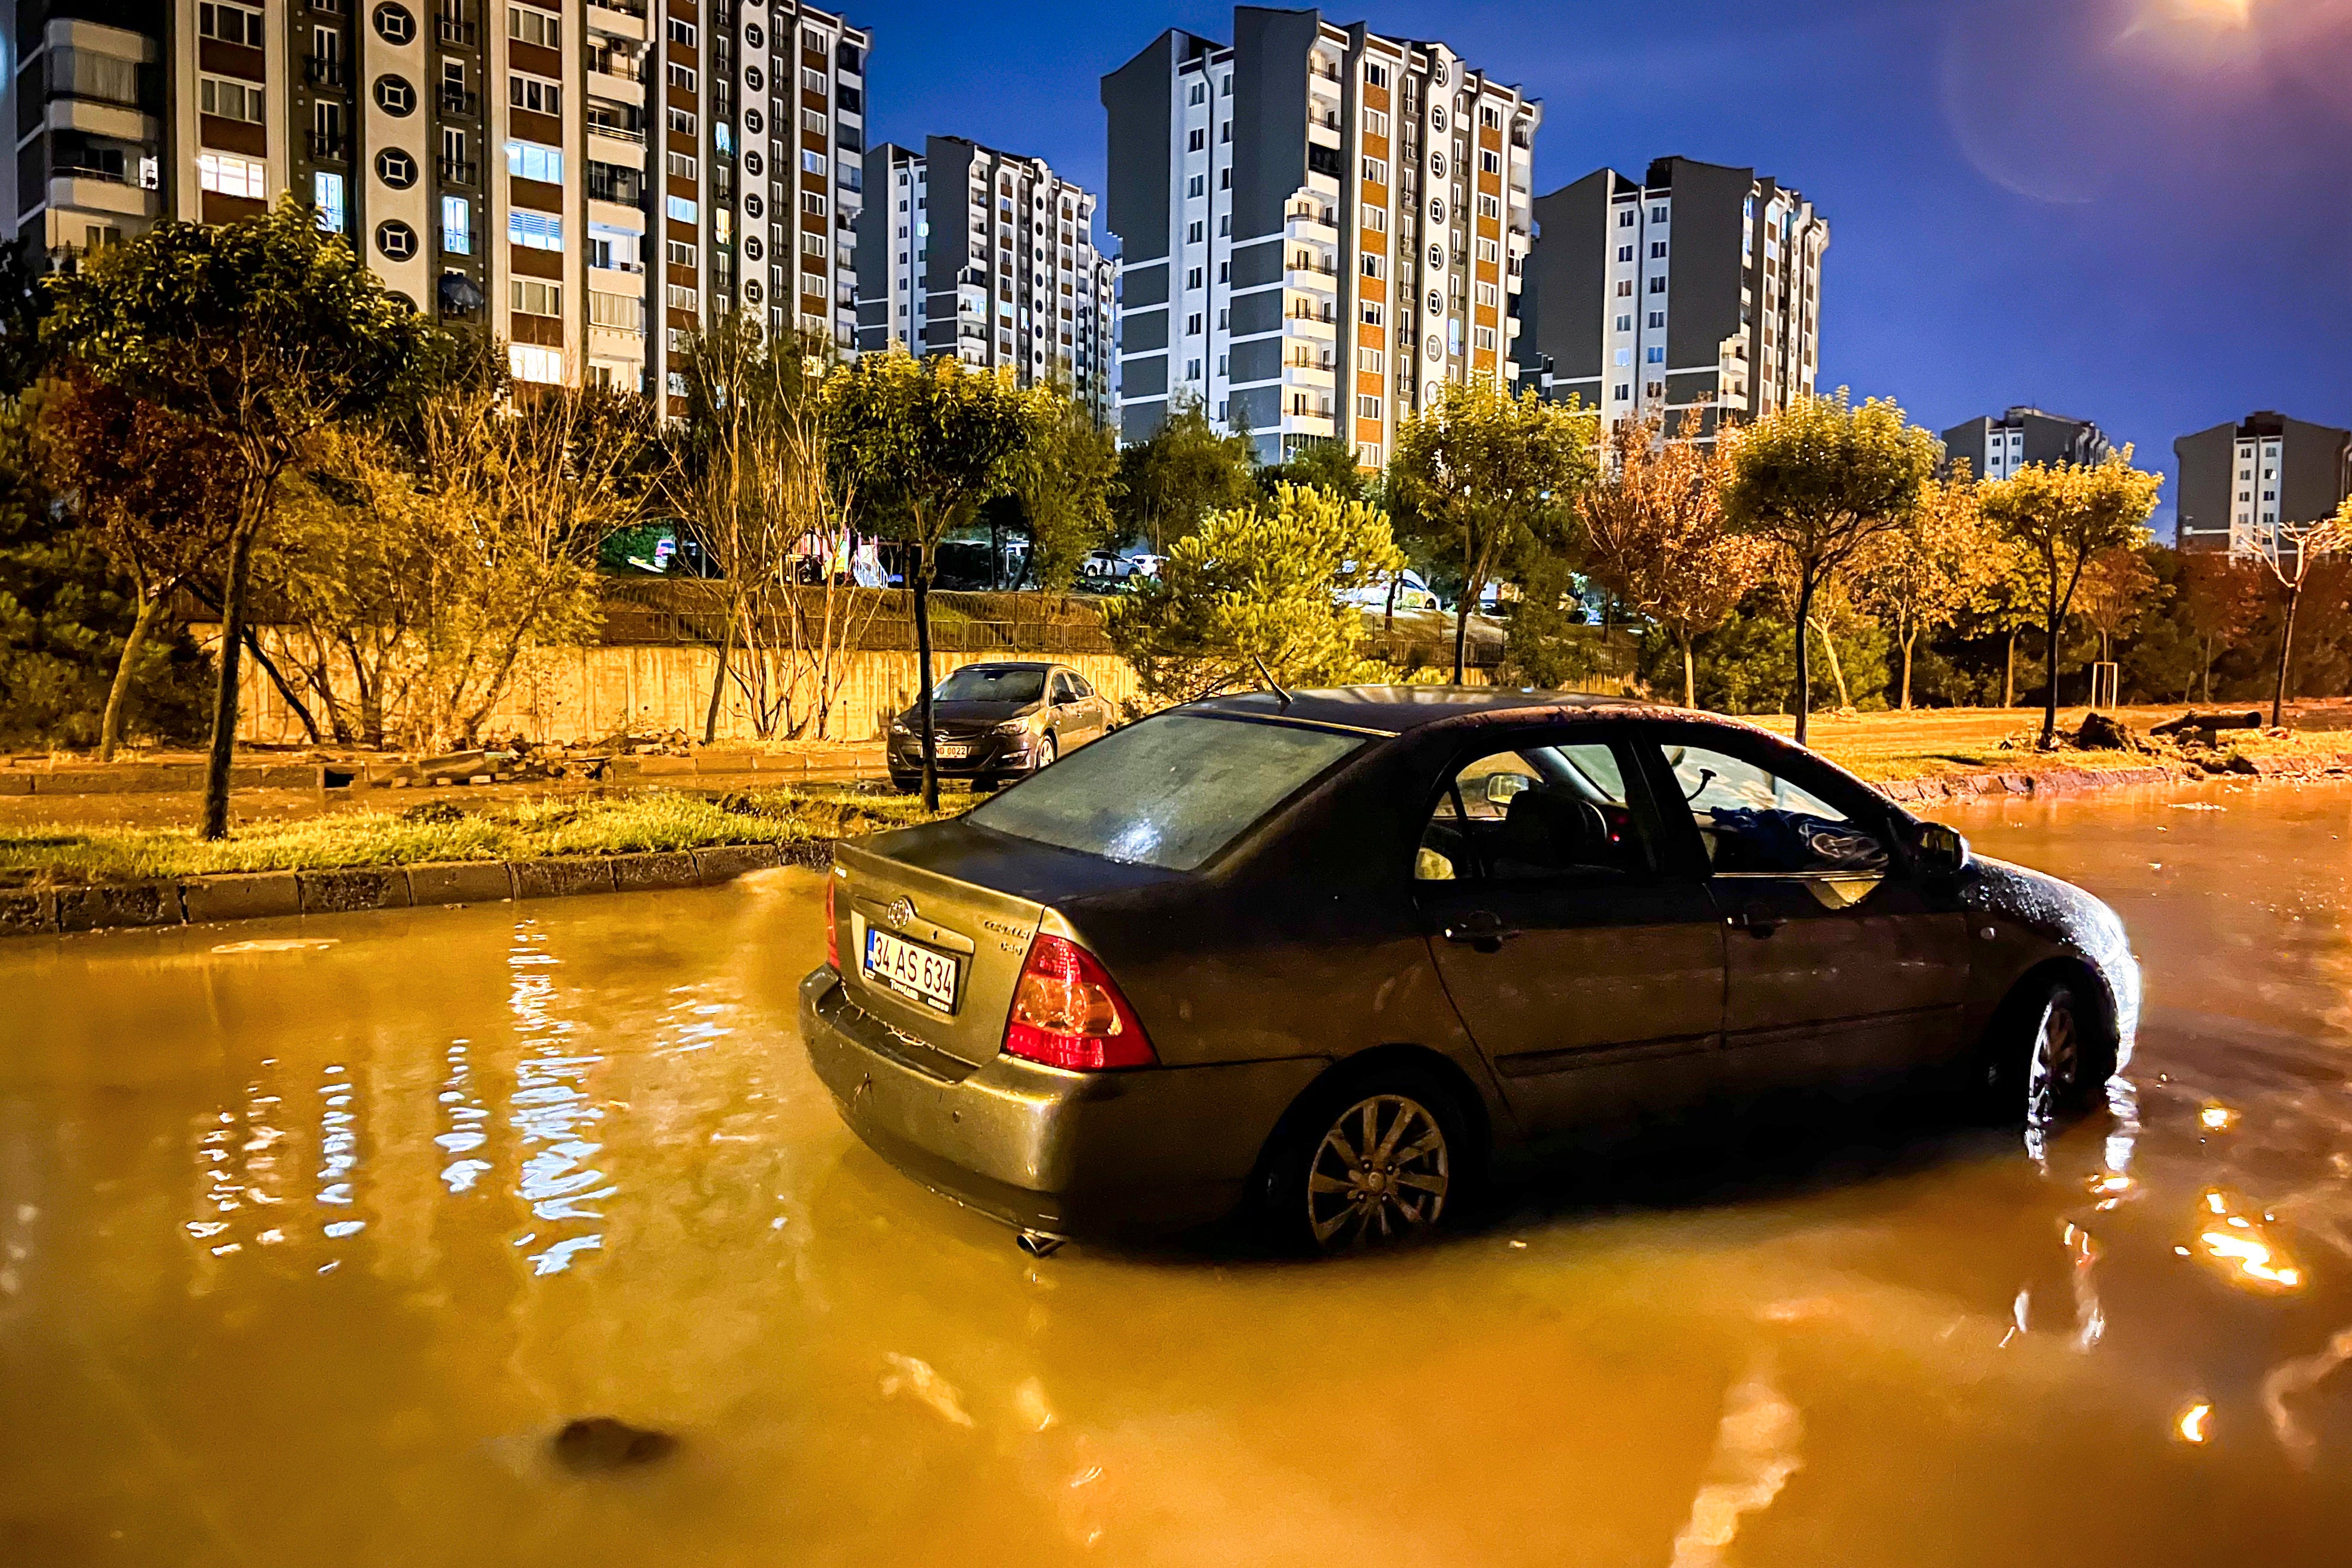 The surging flood waters affected more than 1,750 homes and businesses in the city, according to the Istanbul governor’s office.